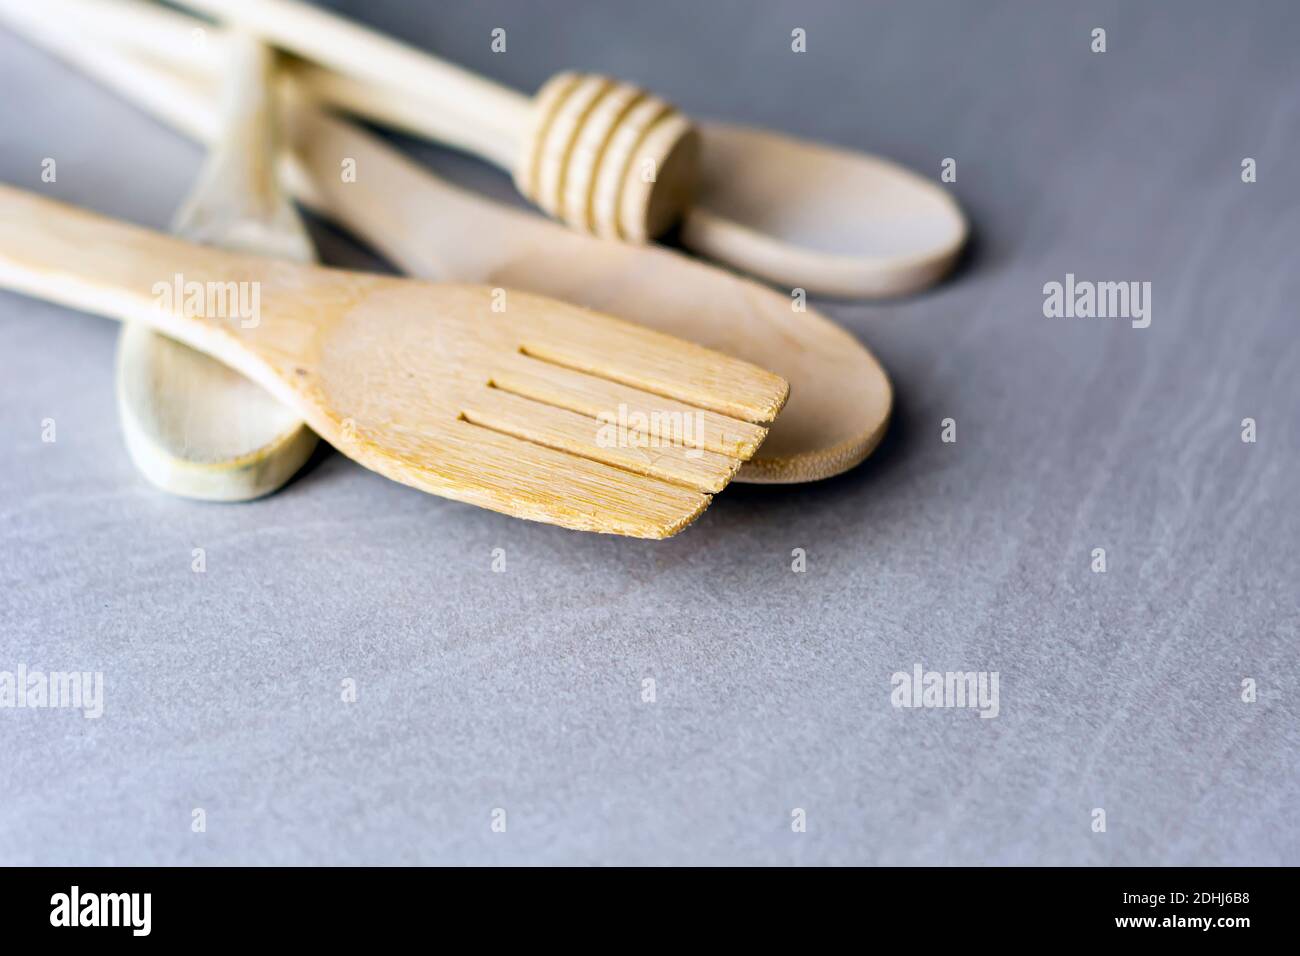 Group of wooden kitchen utensils arranged on a gray marble table. Selective focus on the carving fork. Stock Photo